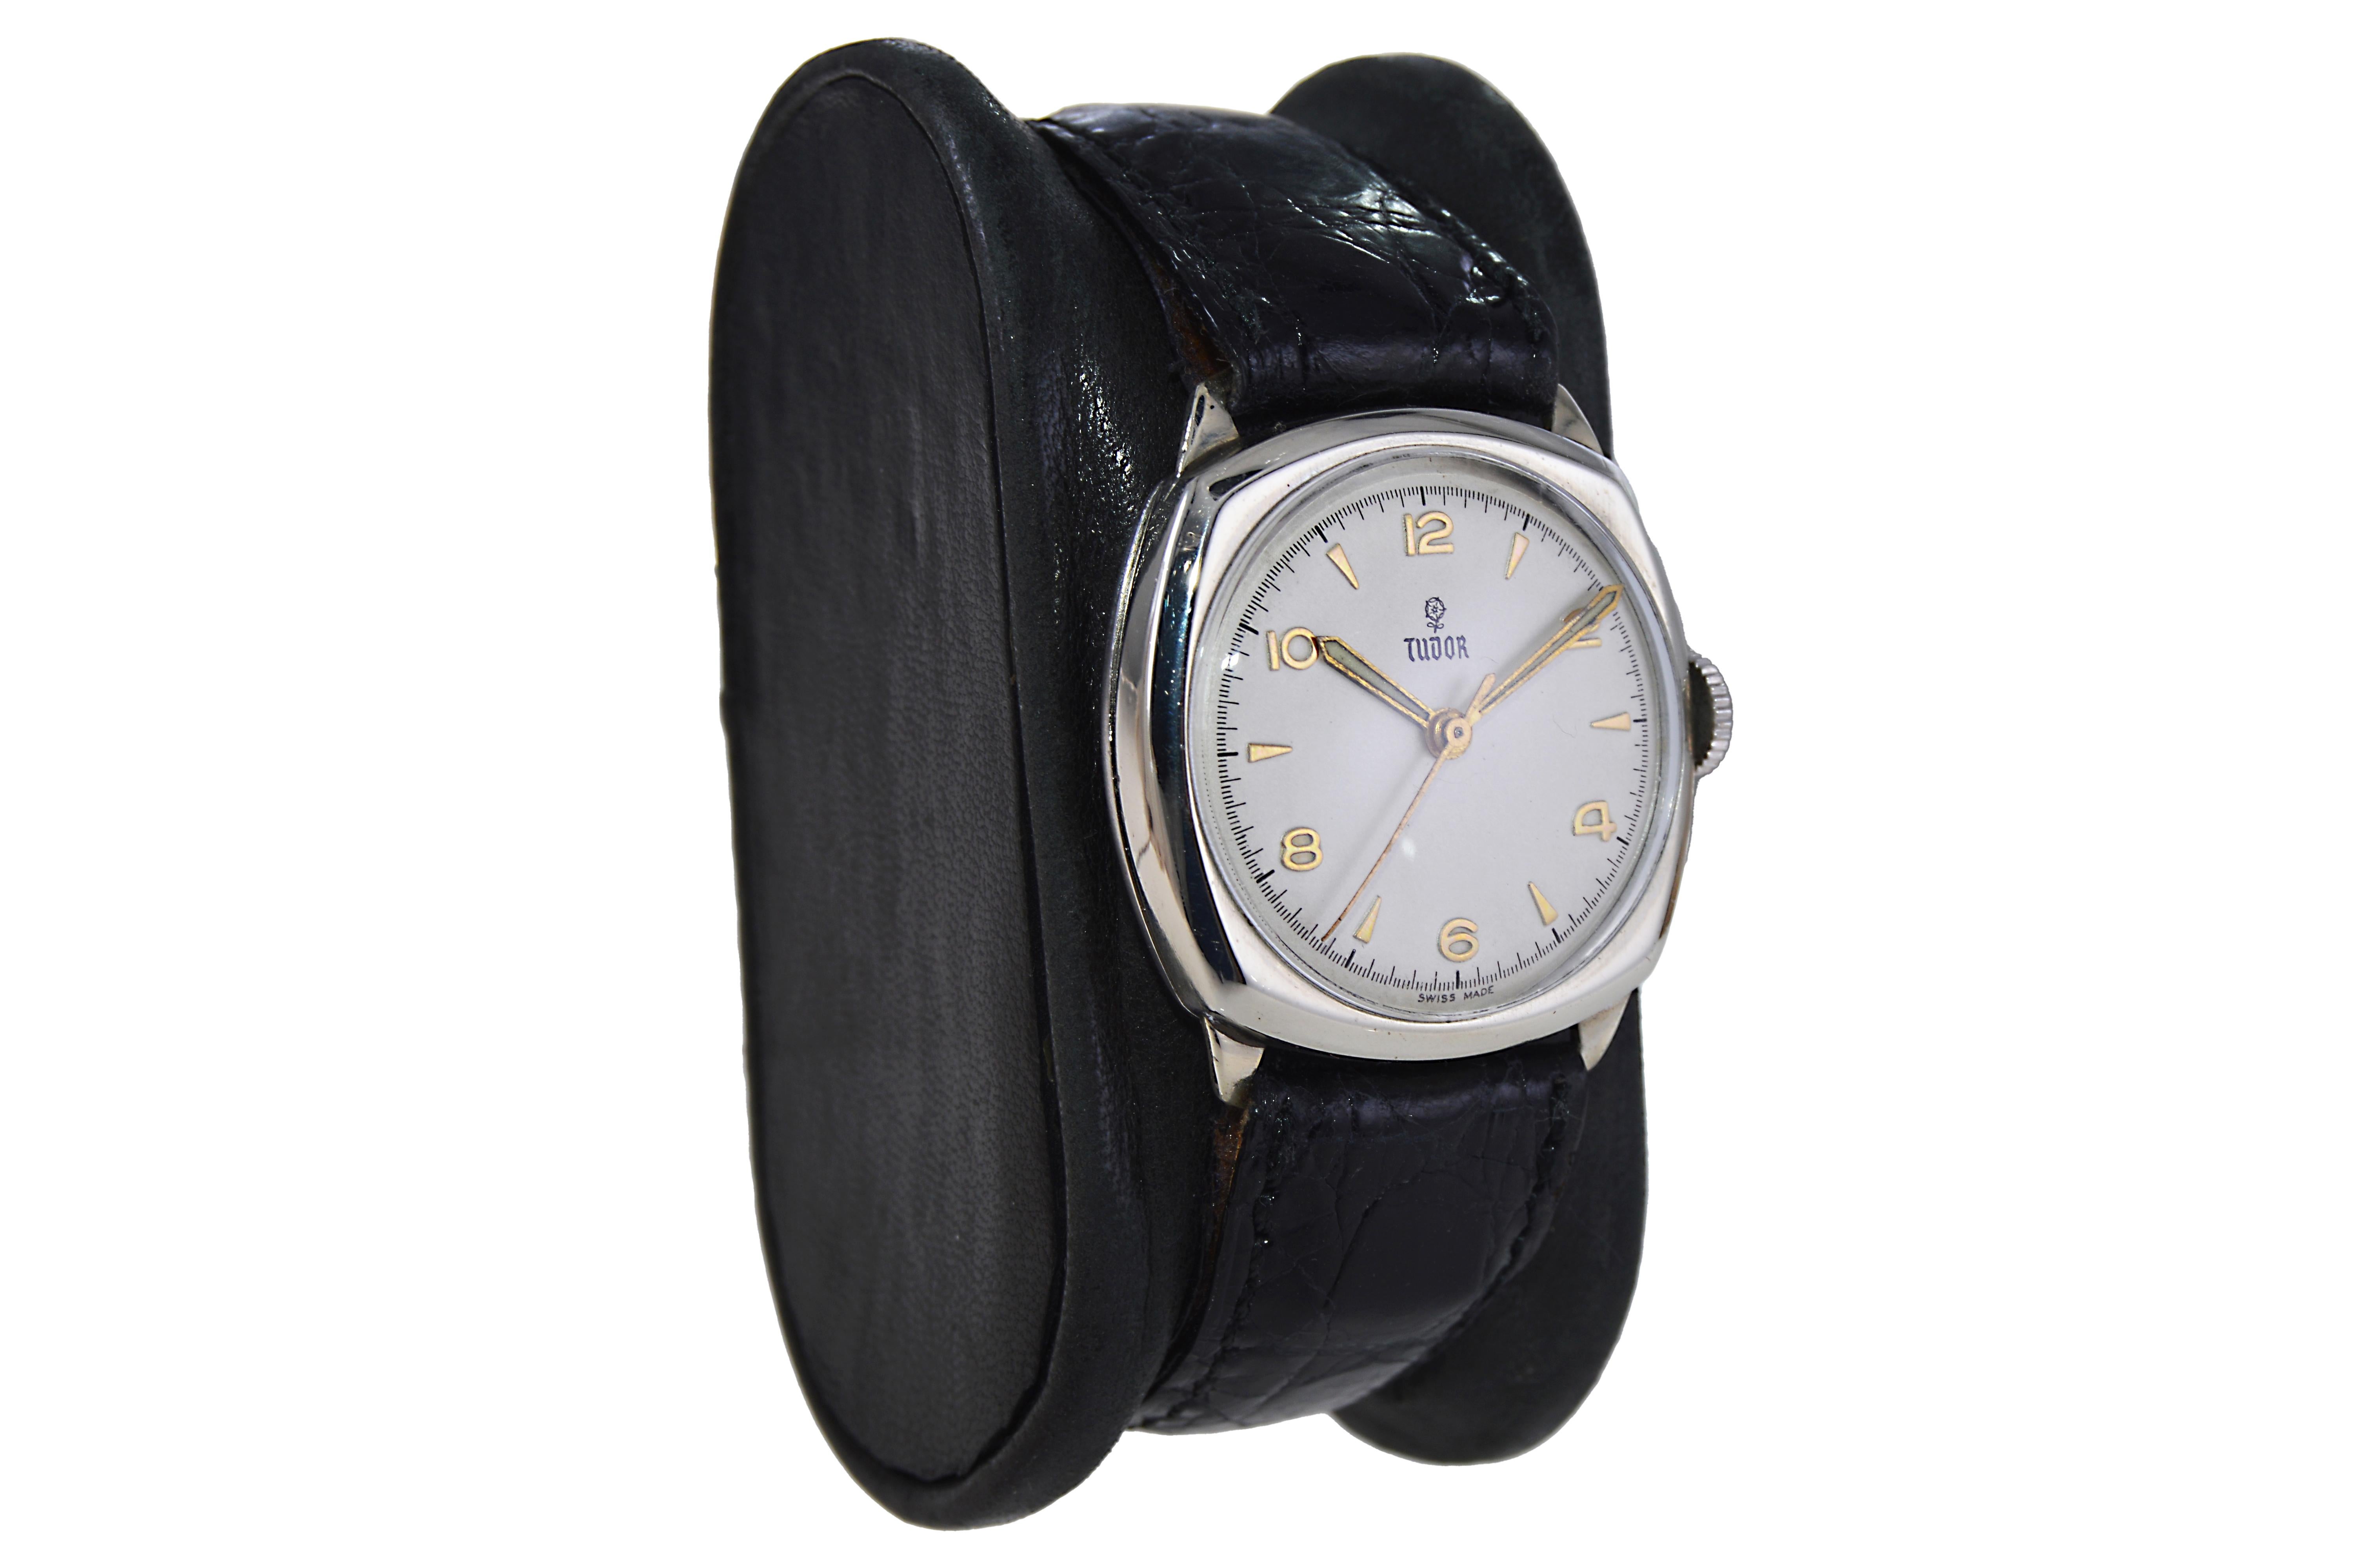 FACTORY / HOUSE: Tudor Watch Company
STYLE / REFERENCE: Cushion Shape  
METAL / MATERIAL: Nickel
DIMENSIONS: Length 31 mm X  Width 29 mm
CIRCA: 1940's
MOVEMENT / CALIBER: Manual Winding / 17 Jewels / Caliber Font 
DIAL / HANDS: Silvered with Gilt